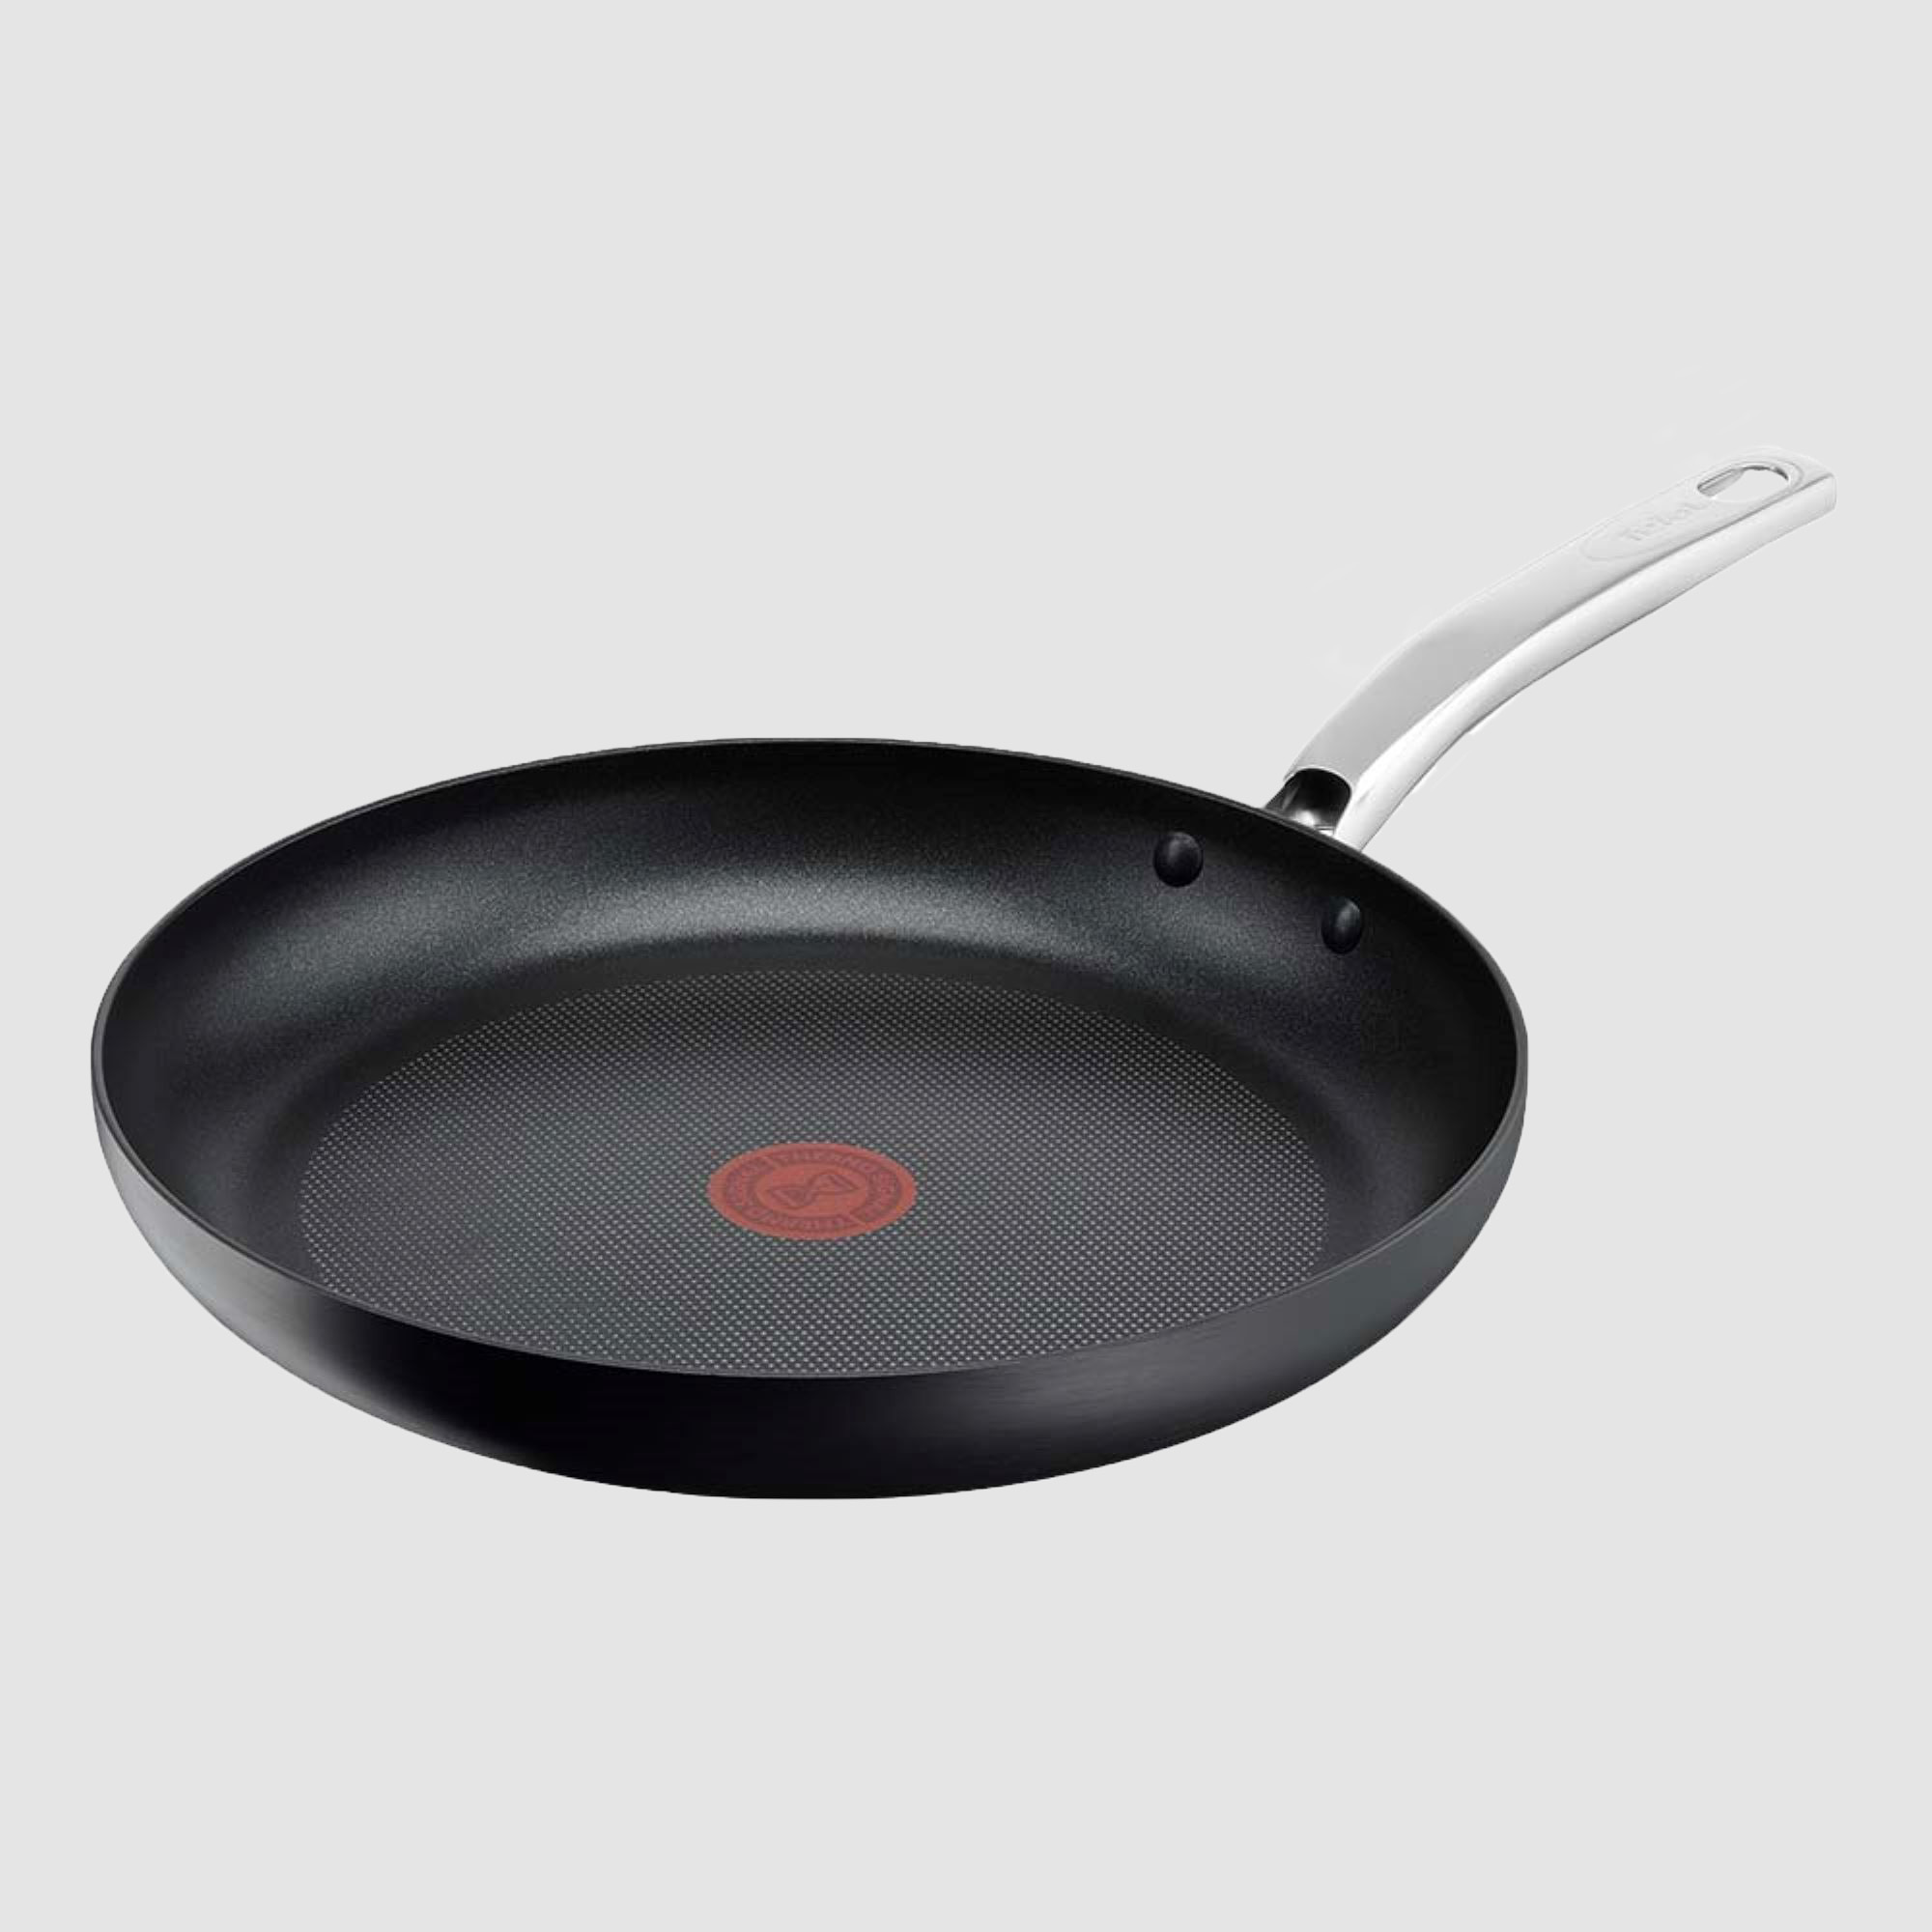 Tefal Gourmet Anodised Non-Stick Frypan 30cm